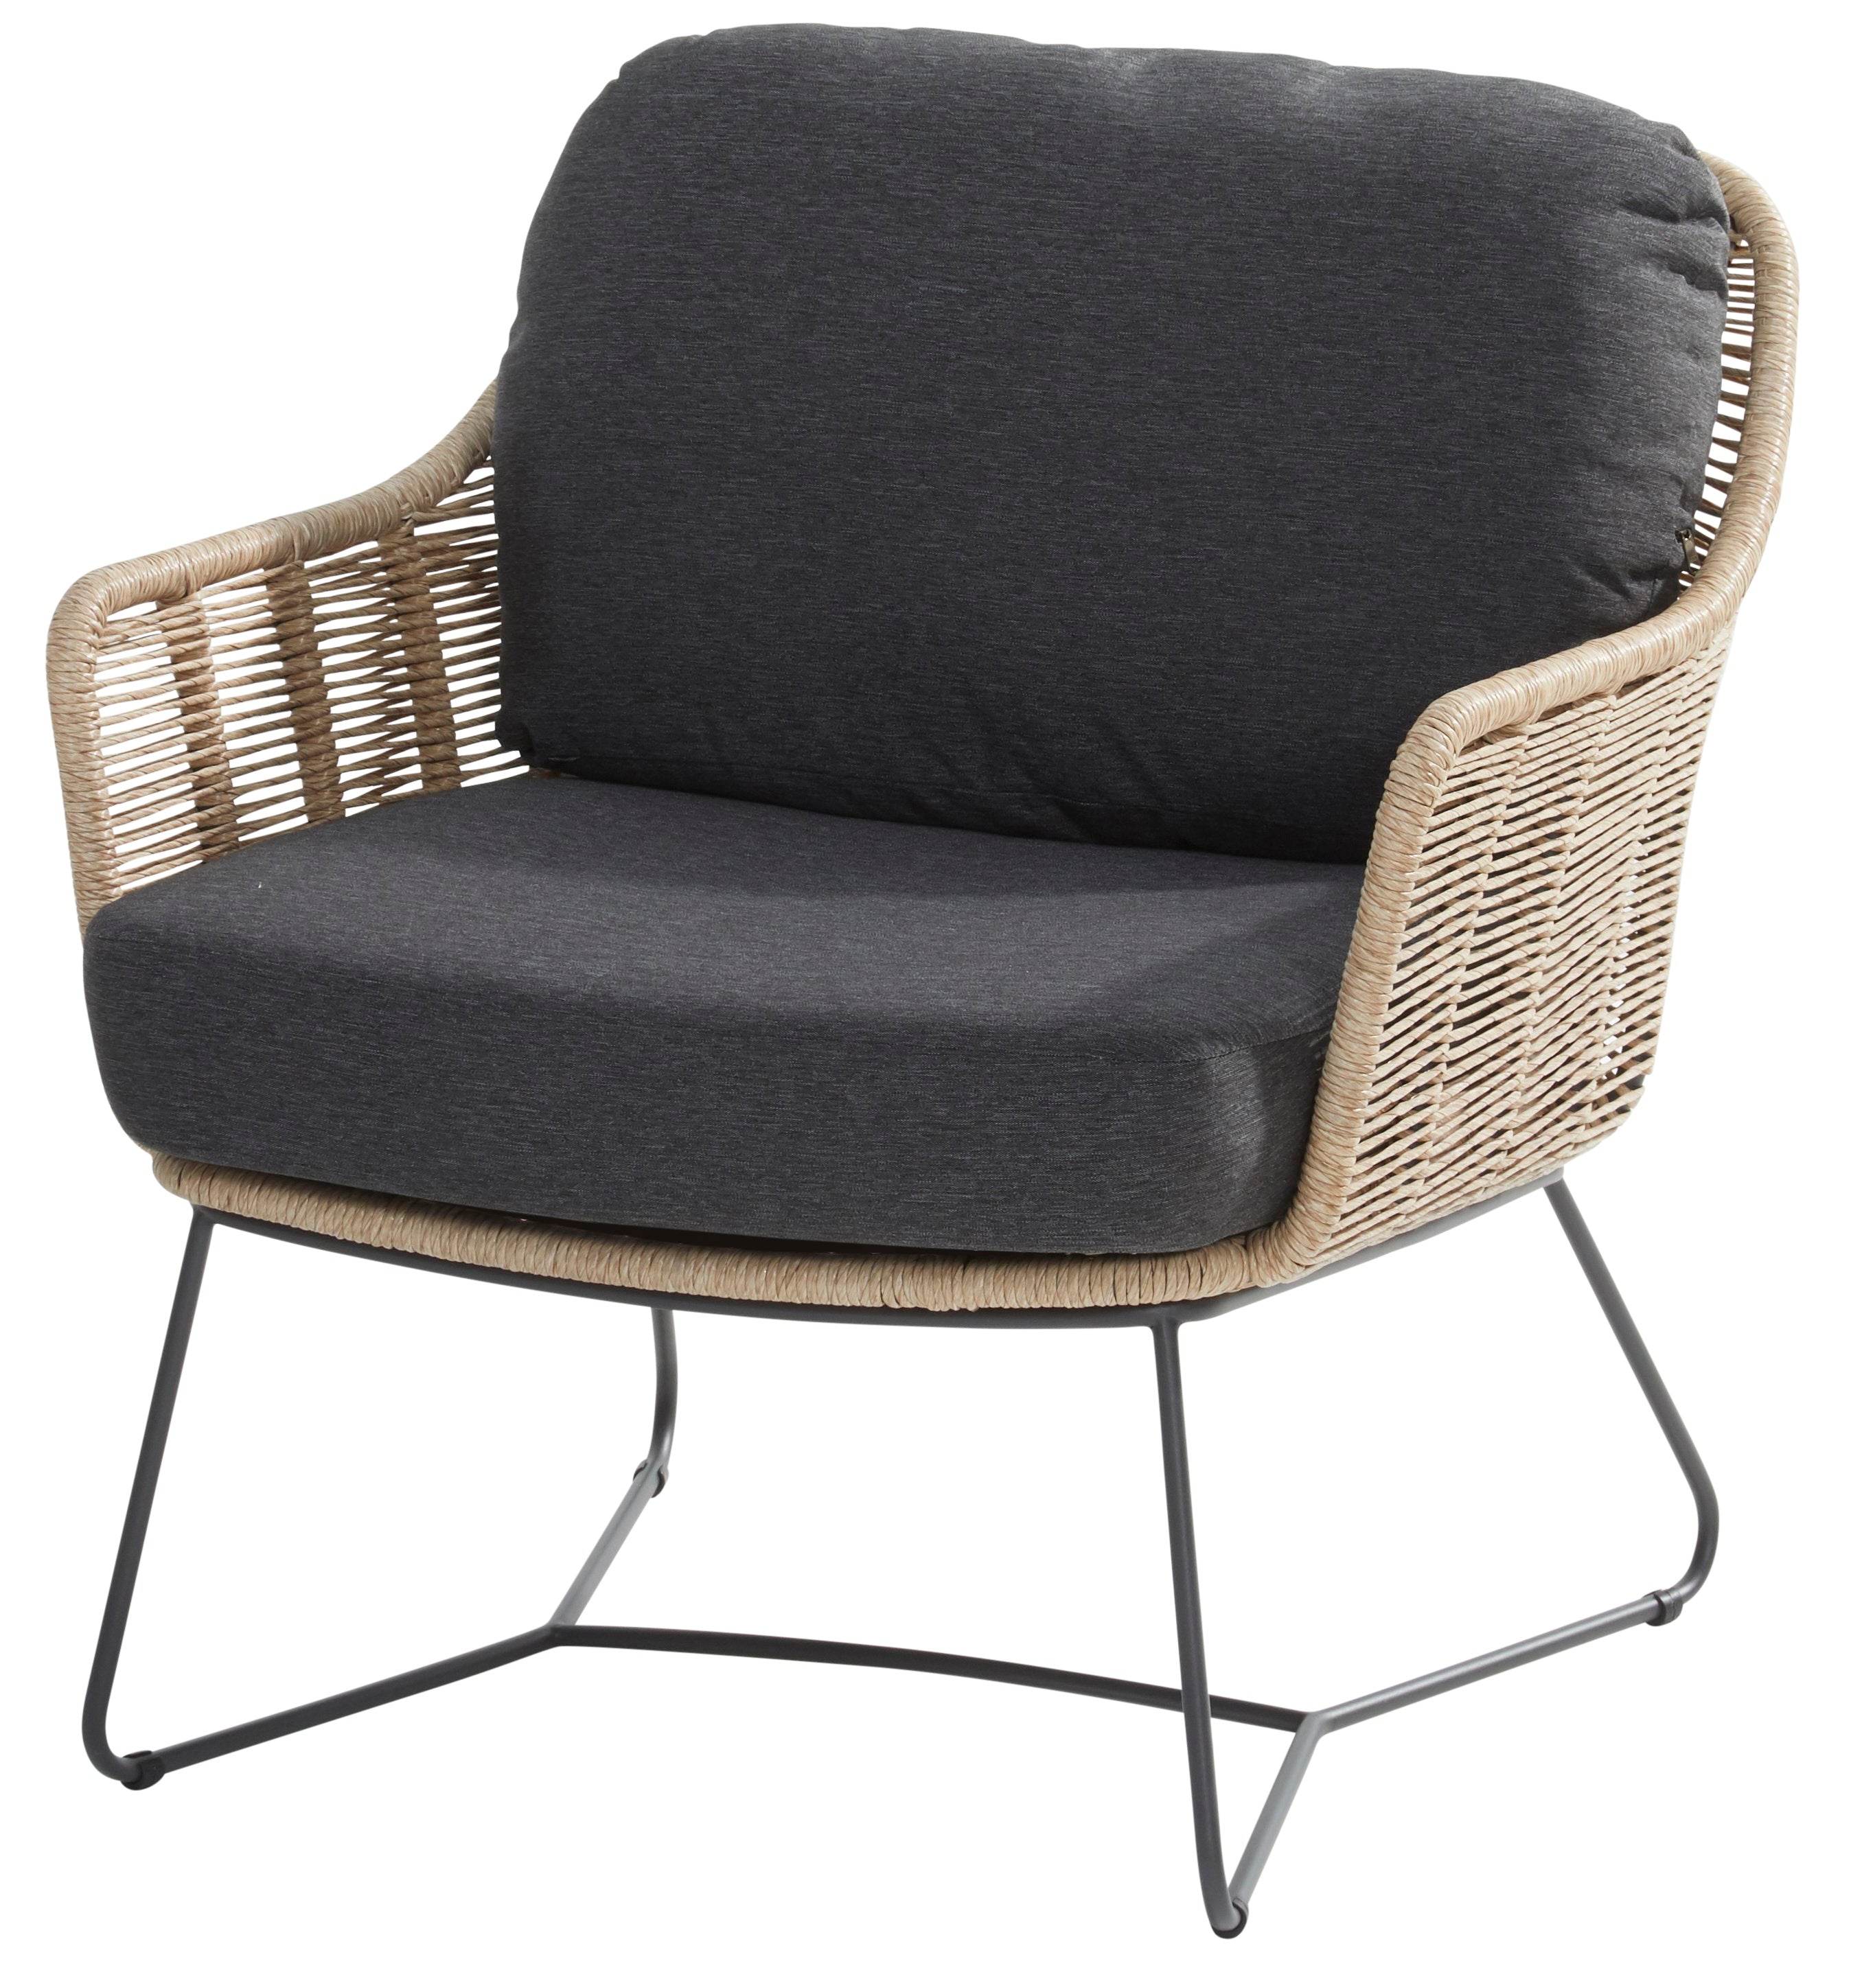 4 Seasons Outdoor Belmond Living Chair Natural Twist With 2 Cushions